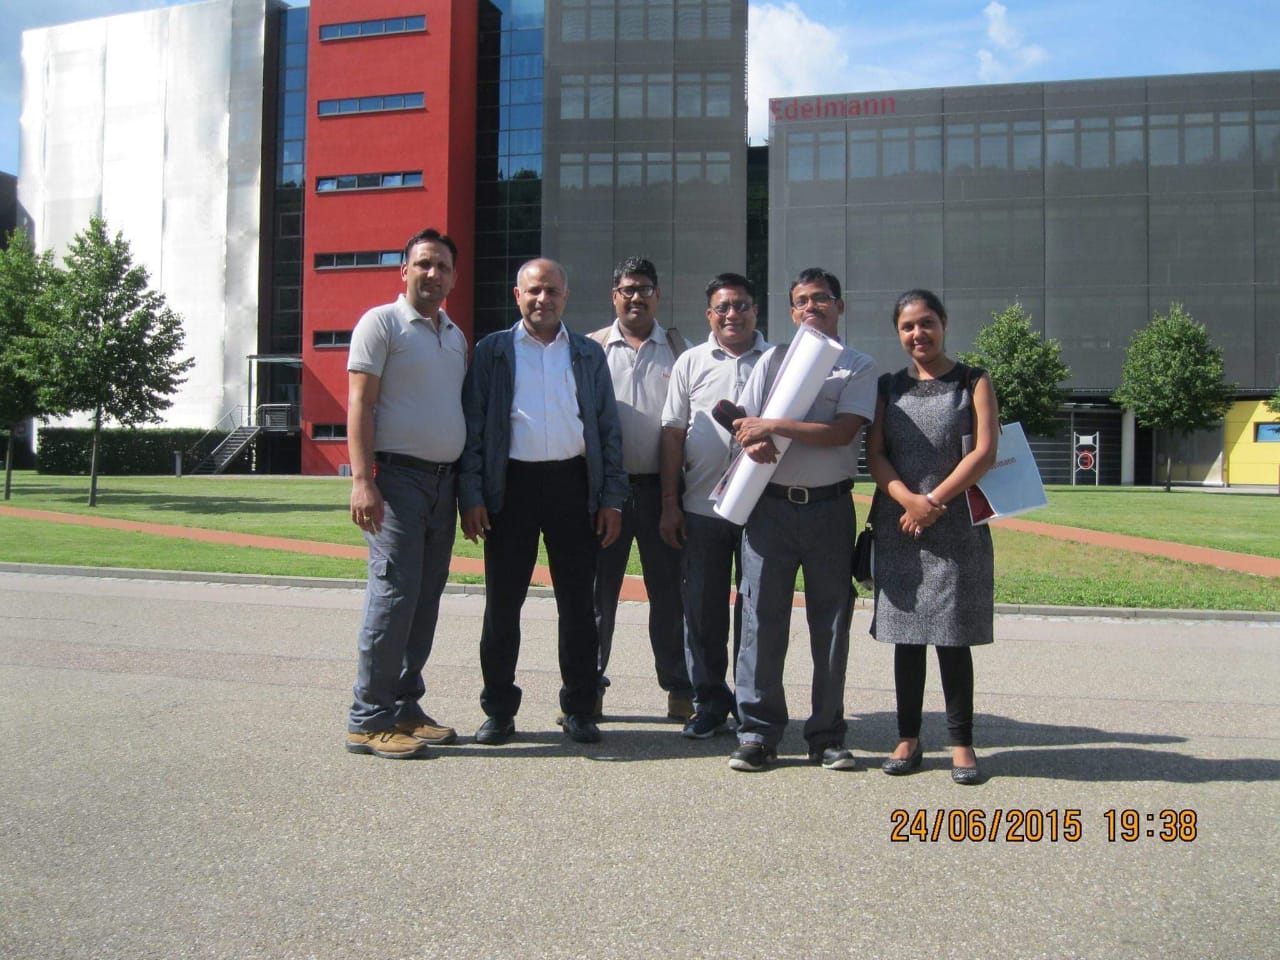 After successful completetion of the project in Heidenheim, Germany